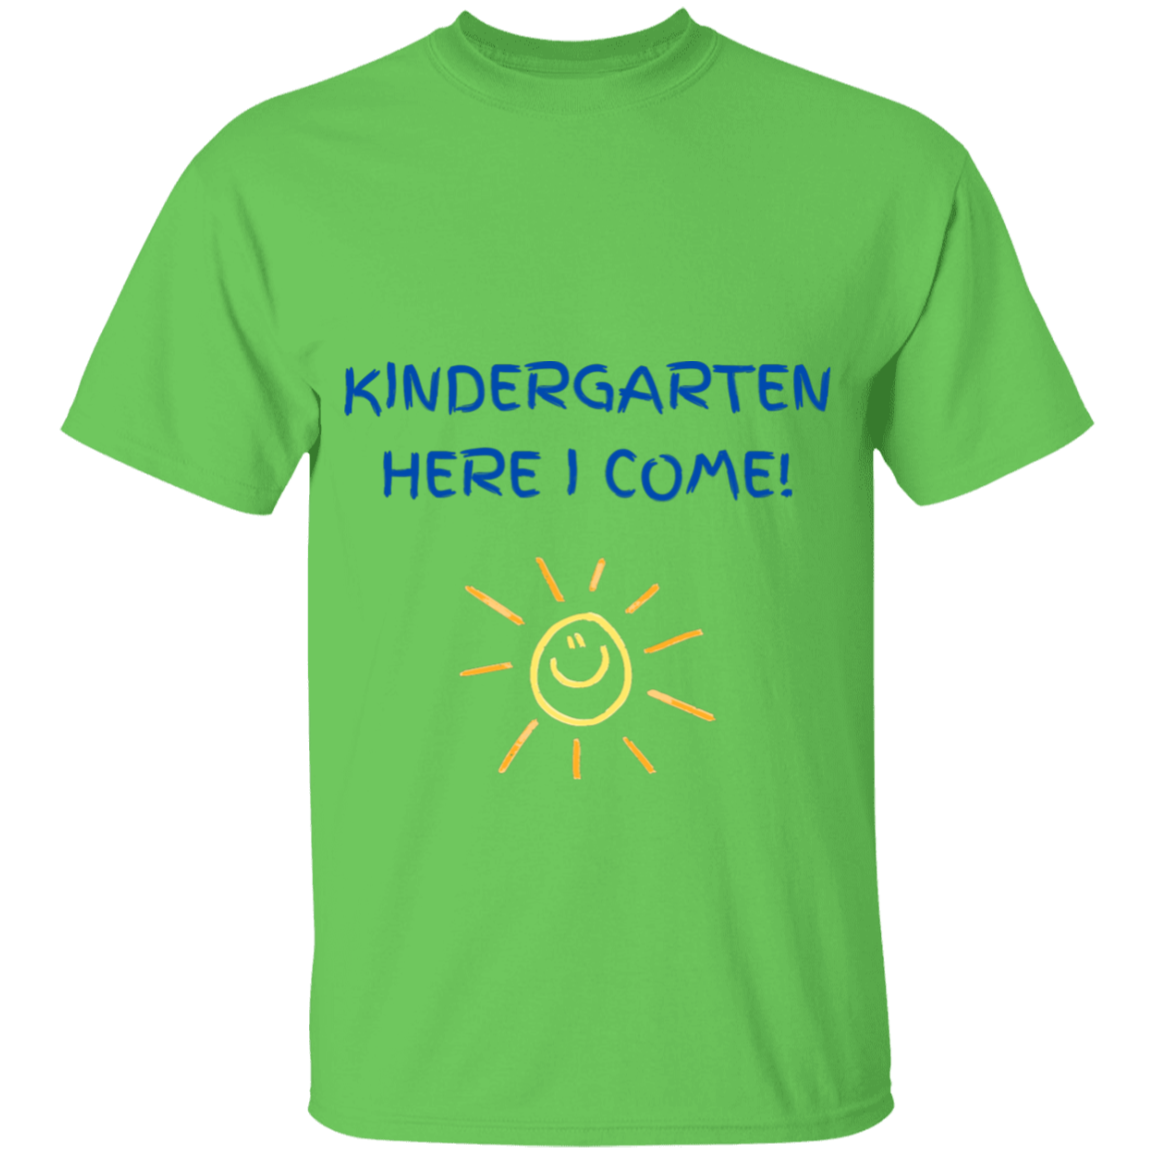 Get trendy with KINDERGARTEN HERE I Come! - T-Shirts available at Good Gift Company. Grab yours for $20.42 today!